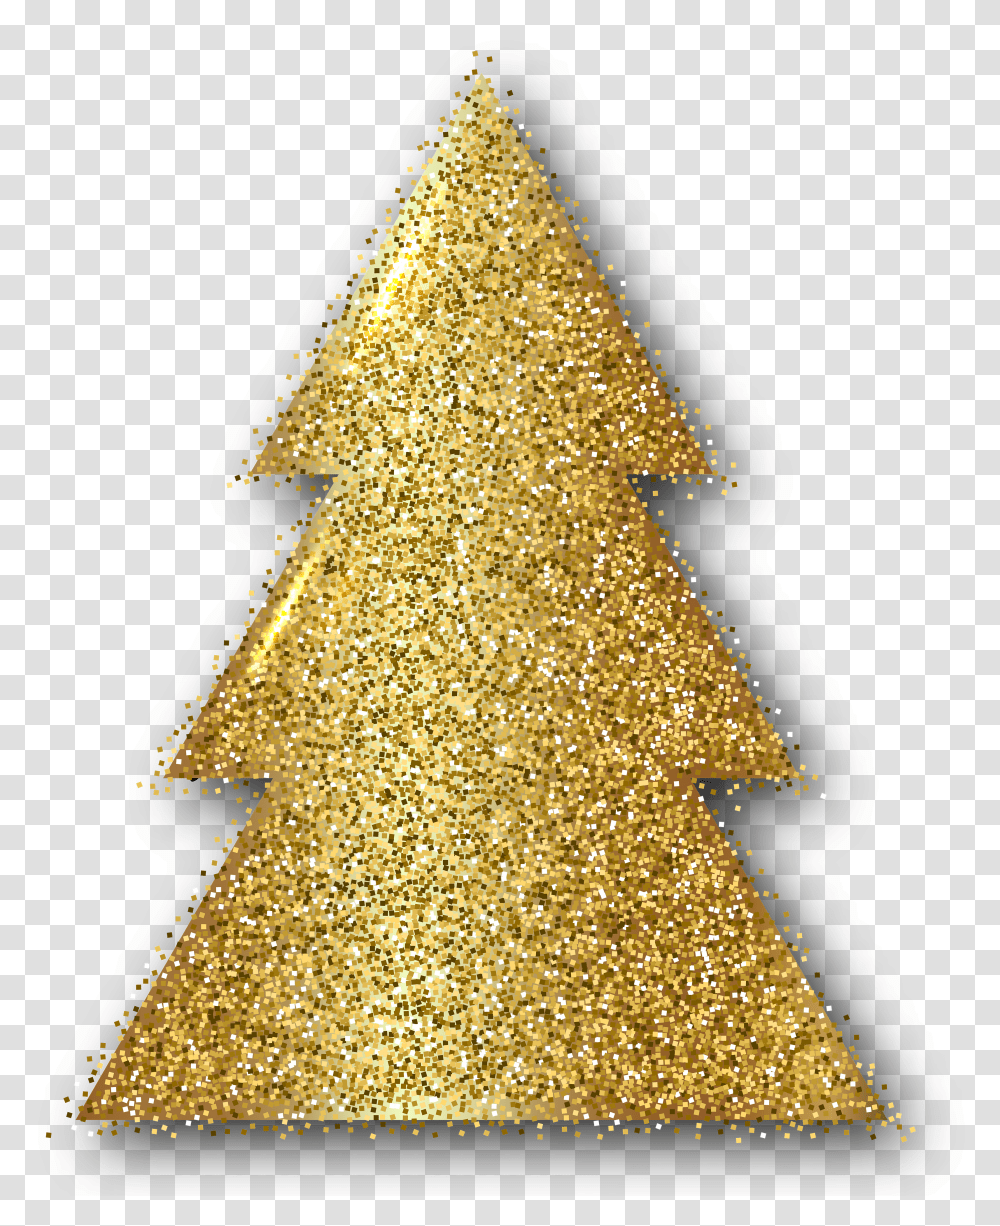 Library Of Gold Christmas Download Files Gold Christmas Tree Transparent Png